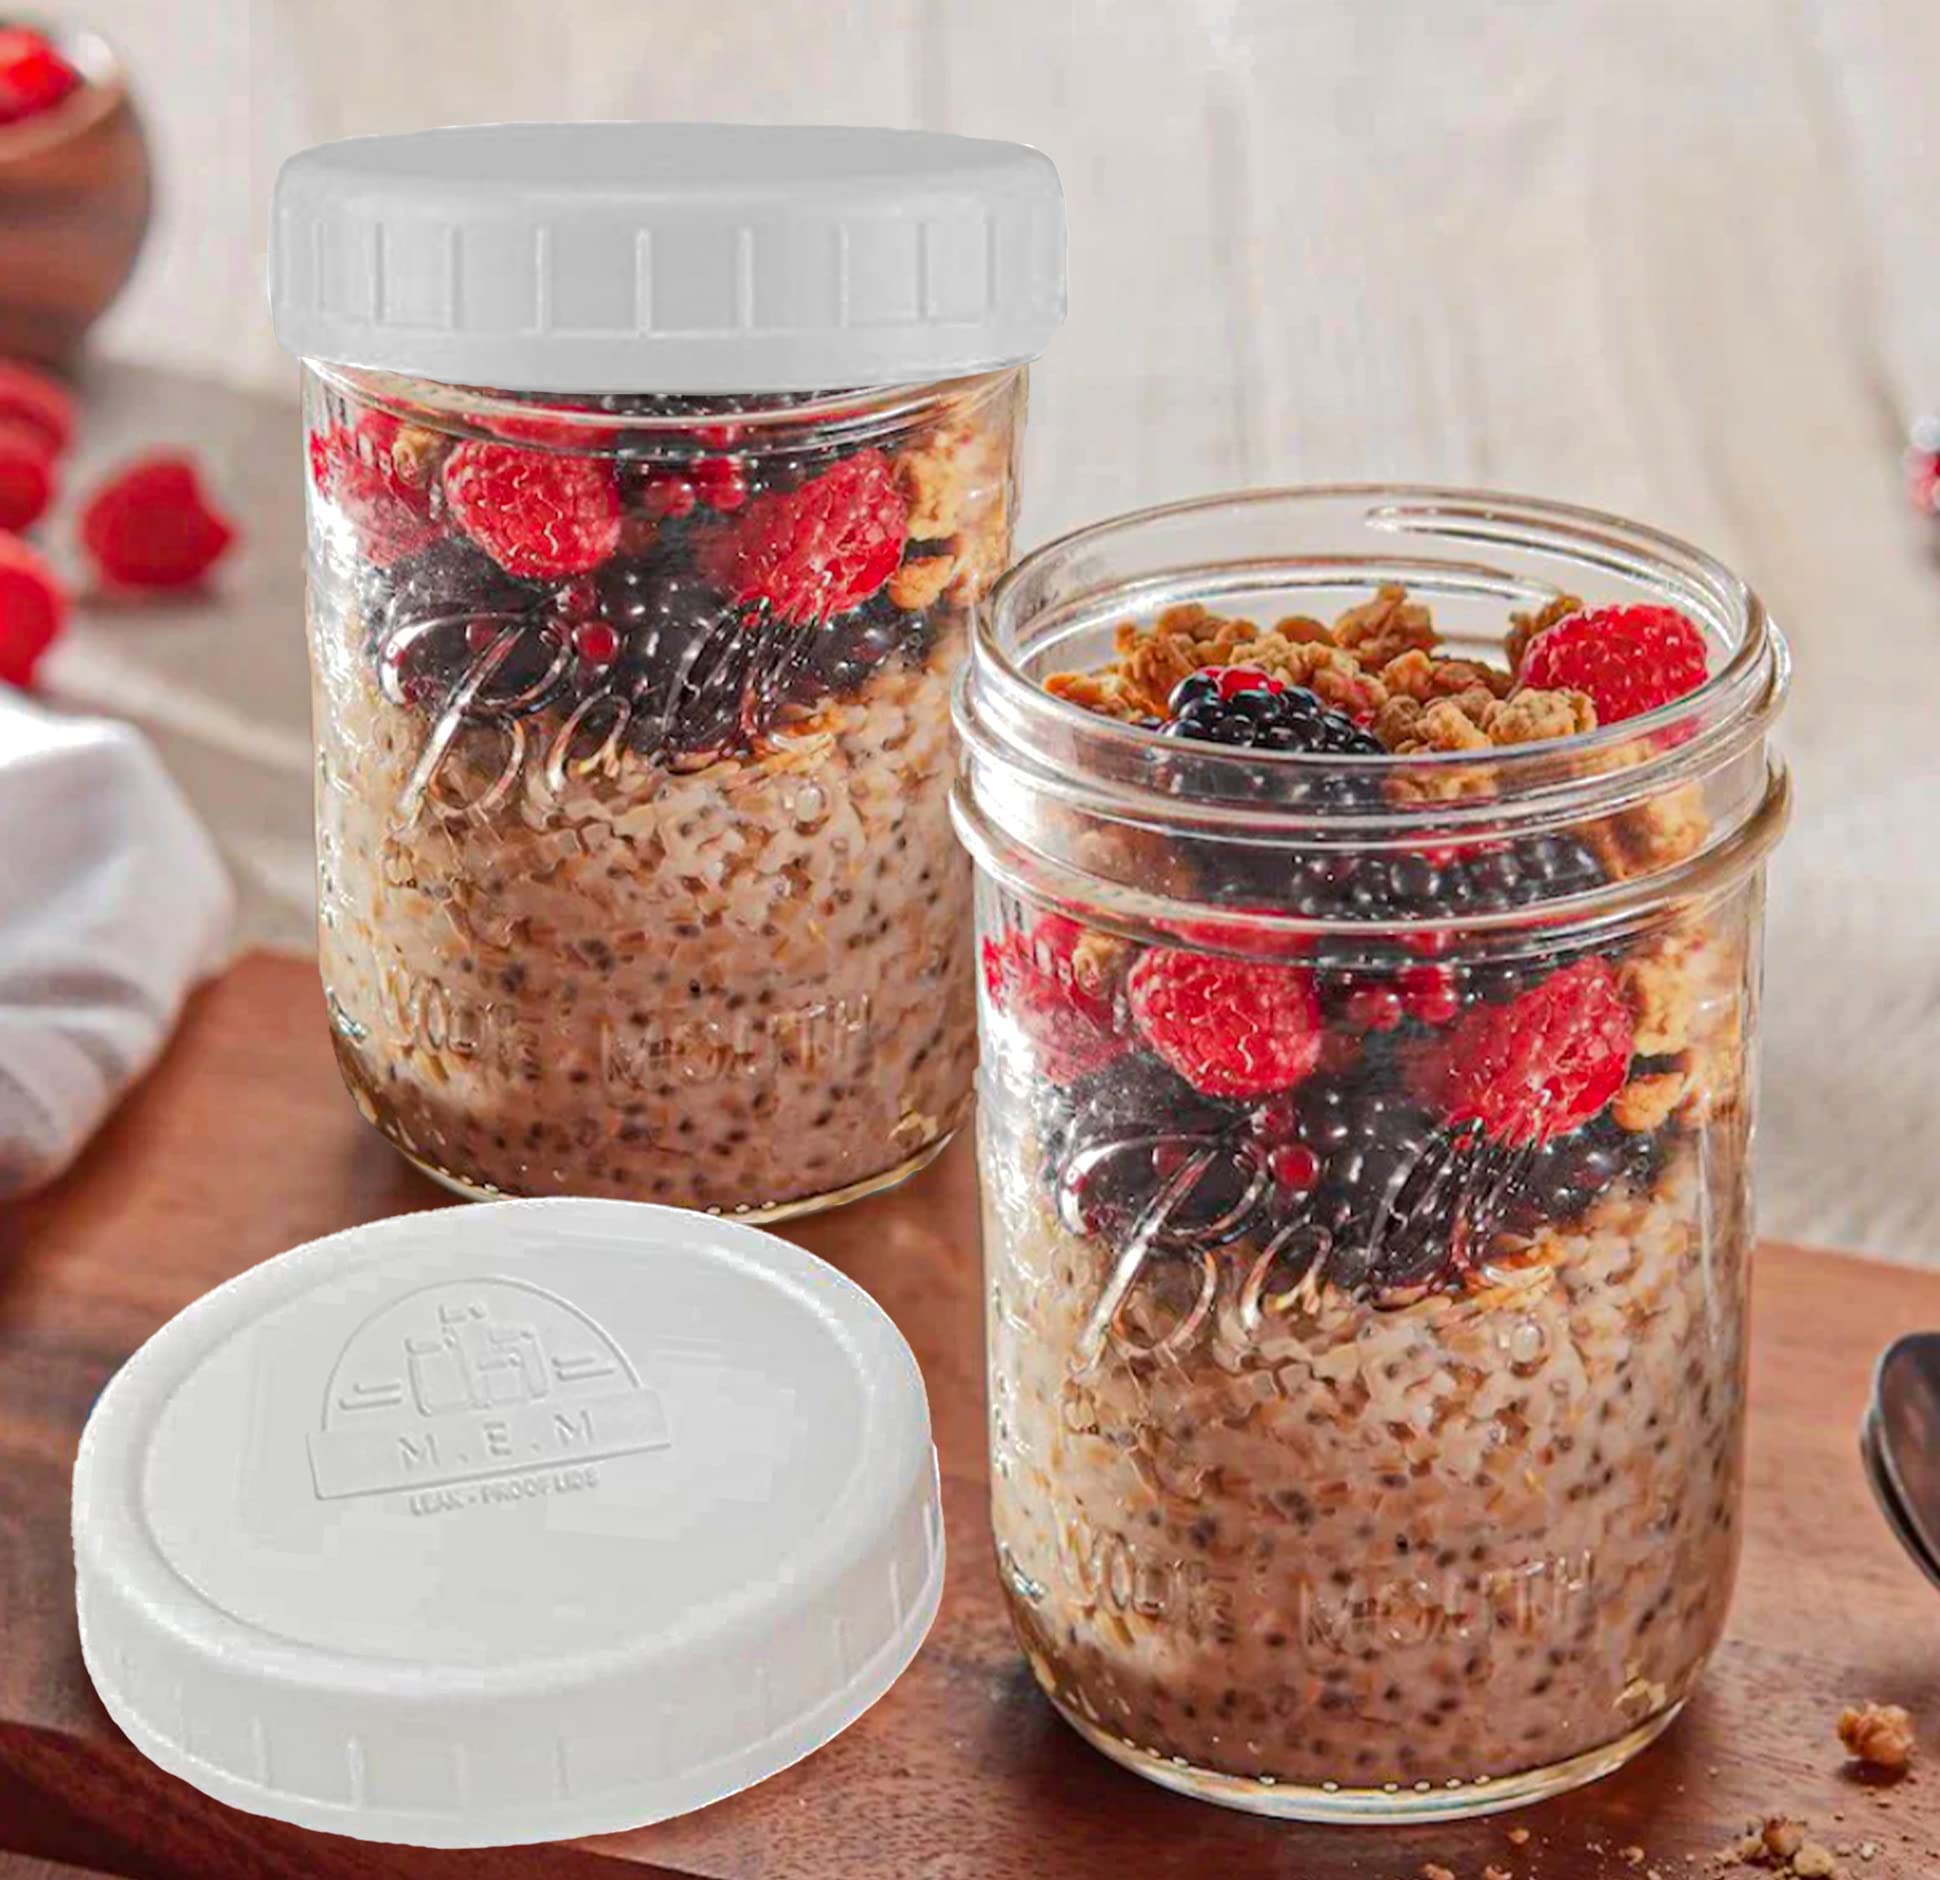 Wide Mouth Mason Jars 16 oz - (2 Pack) - Ball Wide Mouth 16-Ounces Pint Mason Jars with White M.E.M Food Storage Plastic Lids, Caps Fit Ball and Kerr Wide Mouth - For Storage, Freezing, Leak Proof,